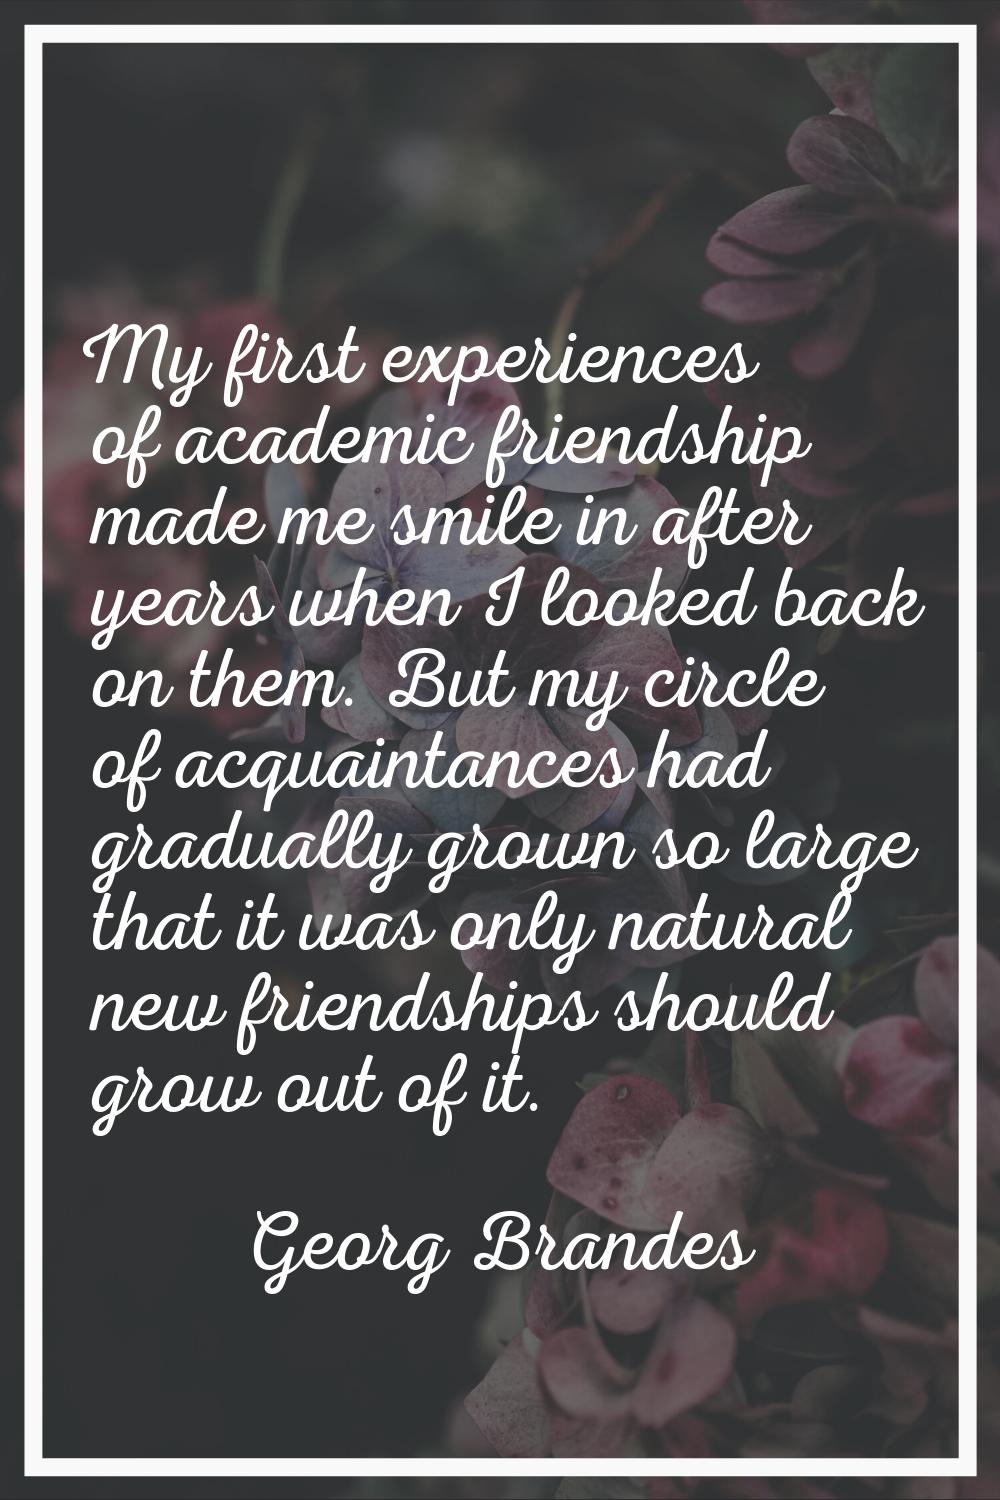 My first experiences of academic friendship made me smile in after years when I looked back on them